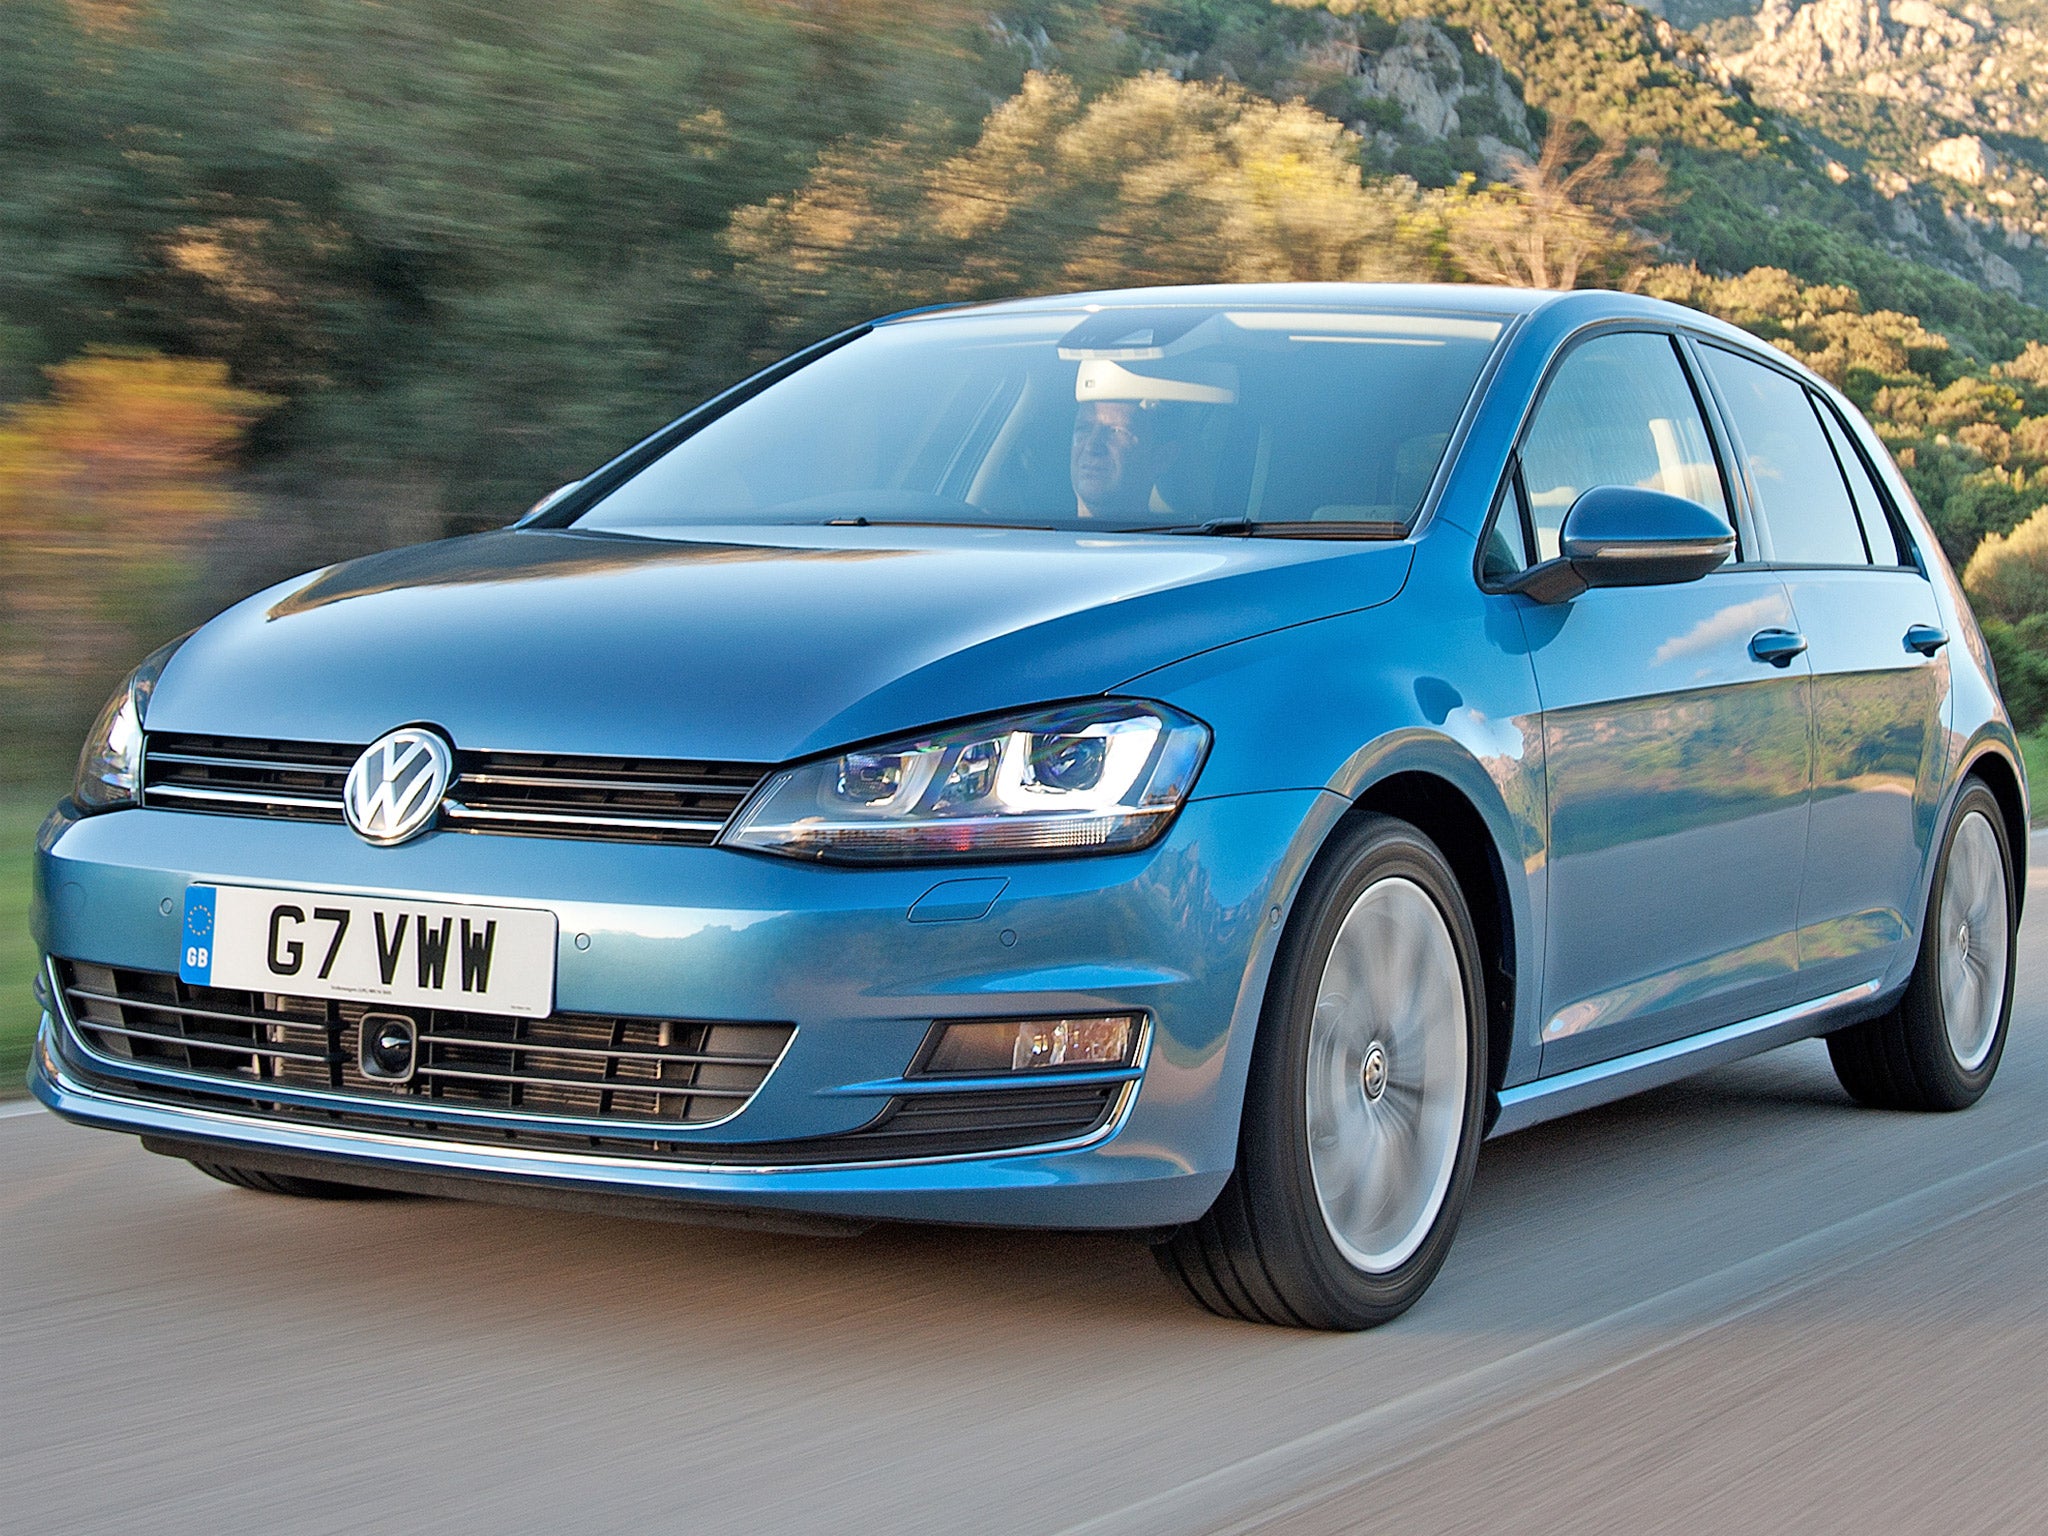 Car of the year? The new VW Golf